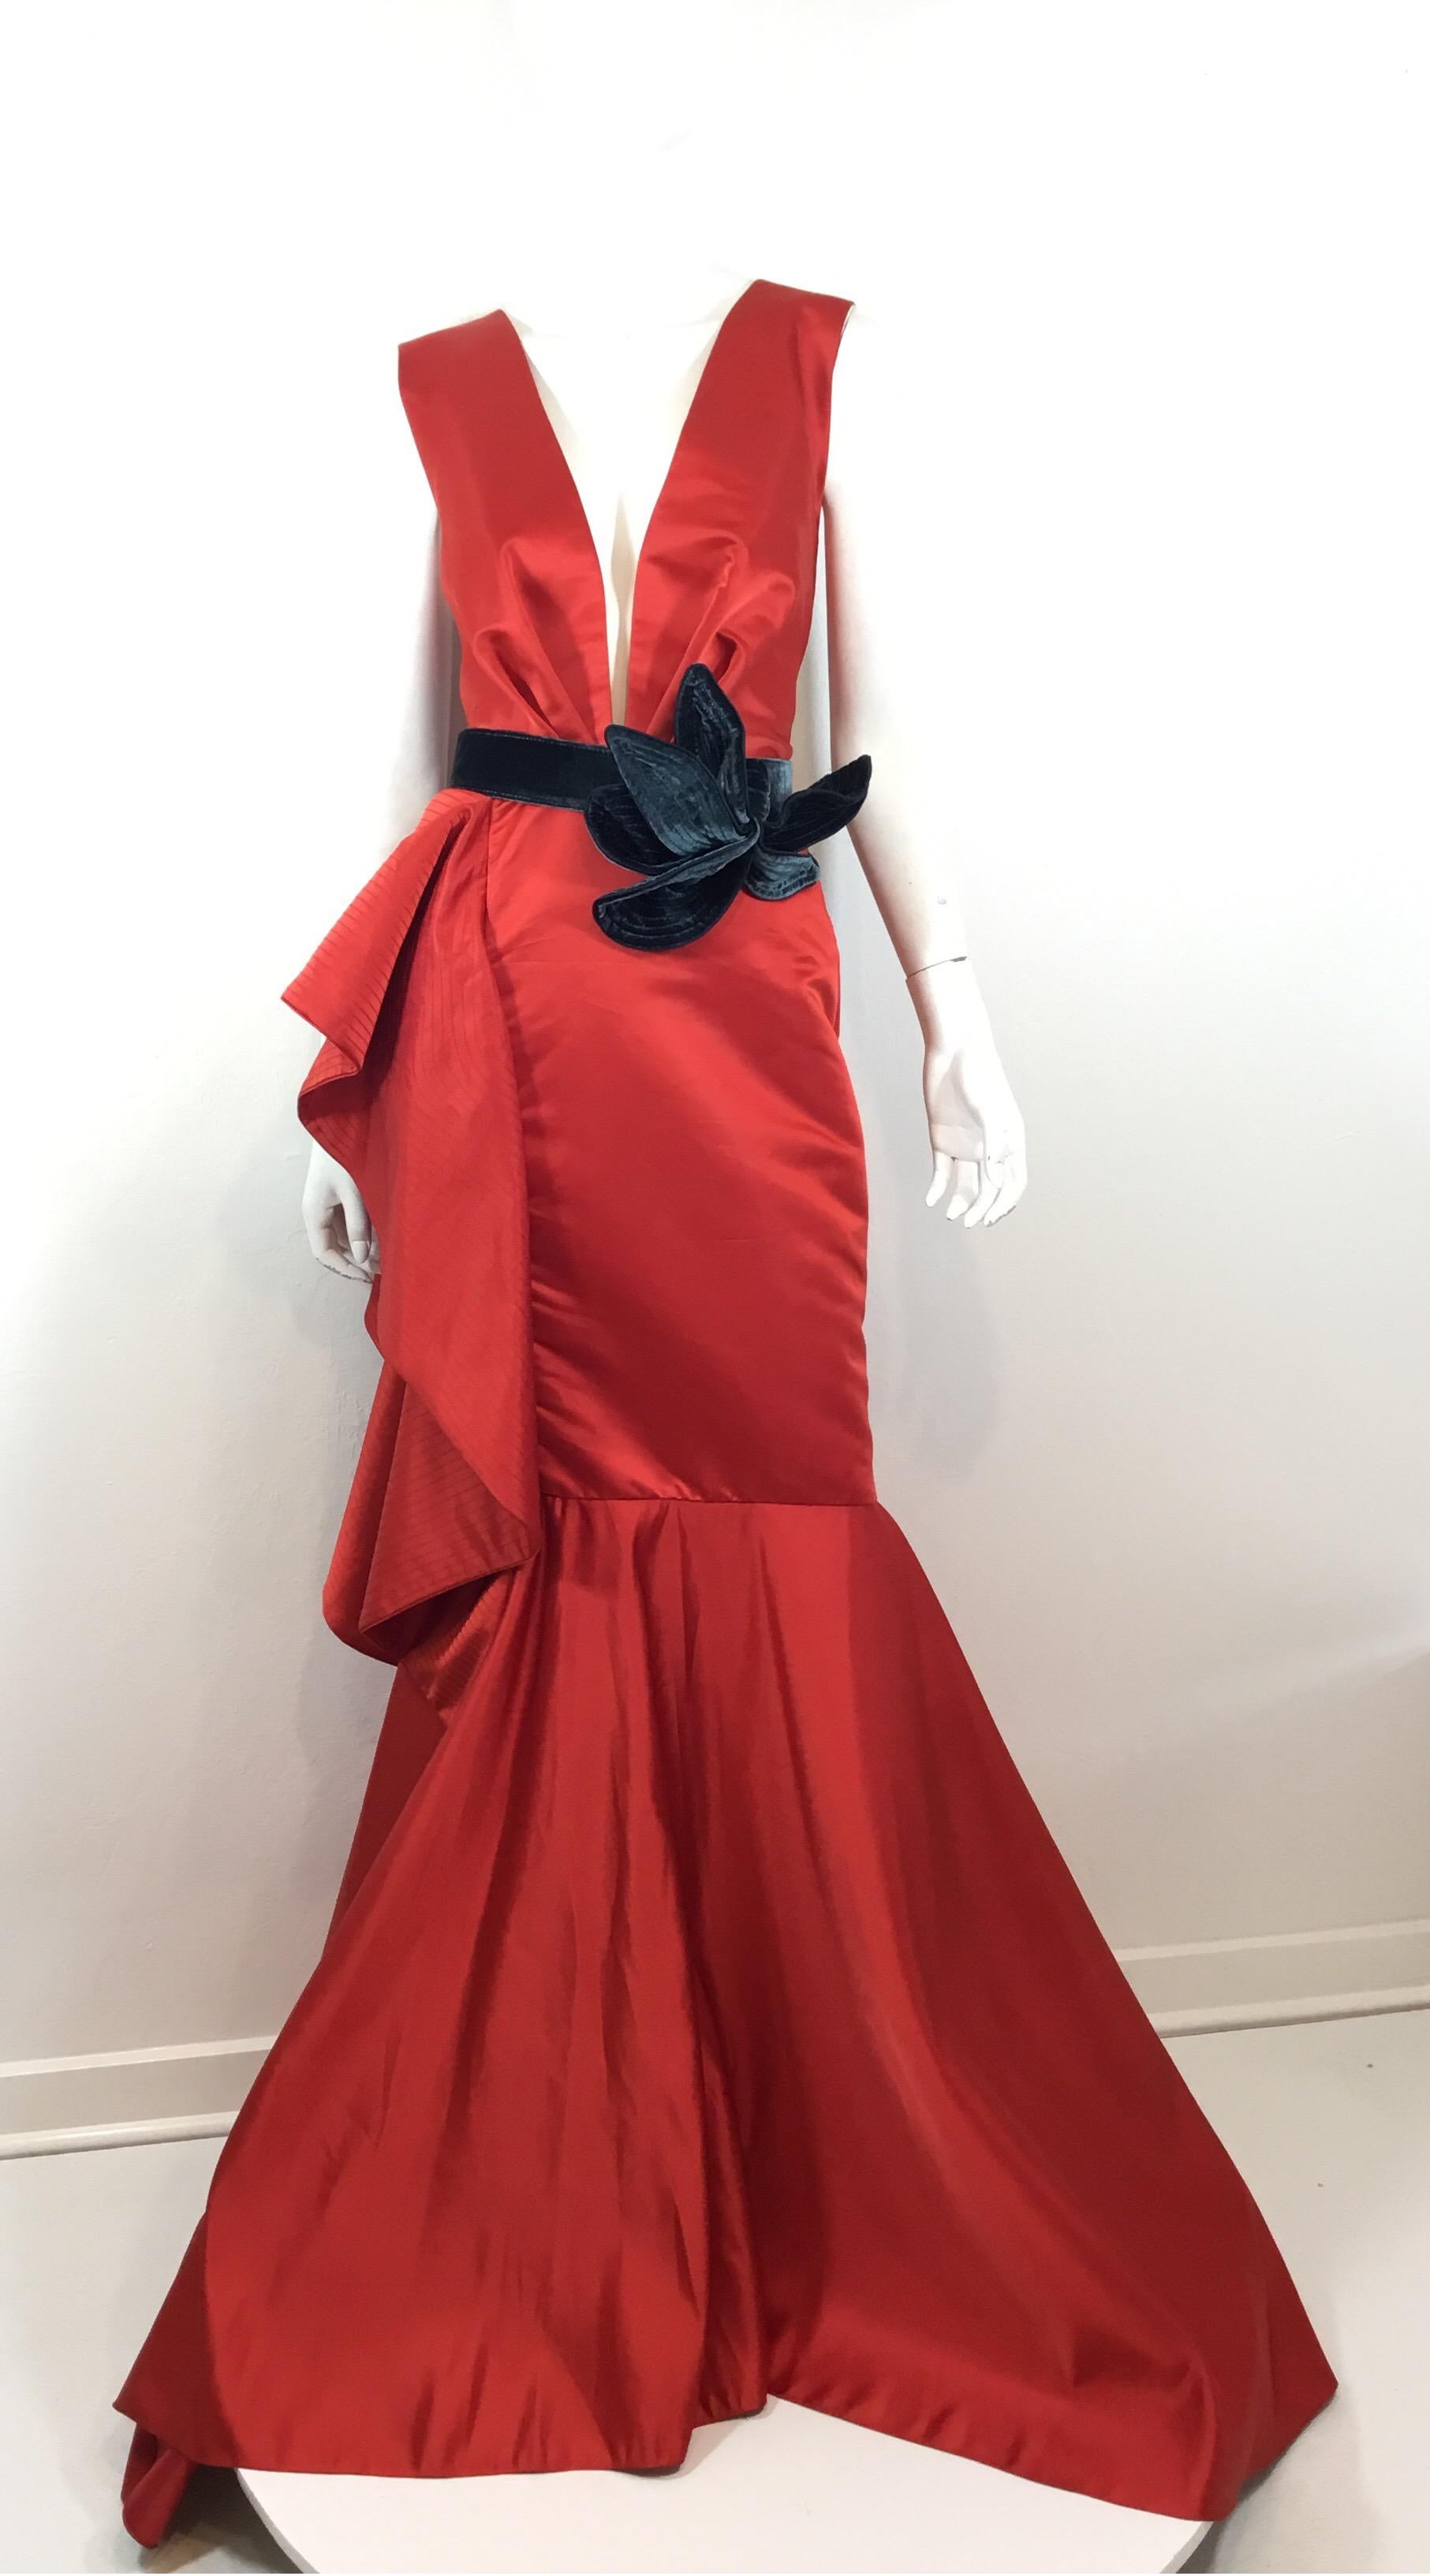 Johanna Ortiz beautiful red gown from the Fall 2016 collection features a plunging neckline, mermaid/Fluted hem, back zipper fastening, and a velvet belt. Gown is a size 6 and composed of a polyester and acetate fabric blend. Excellent